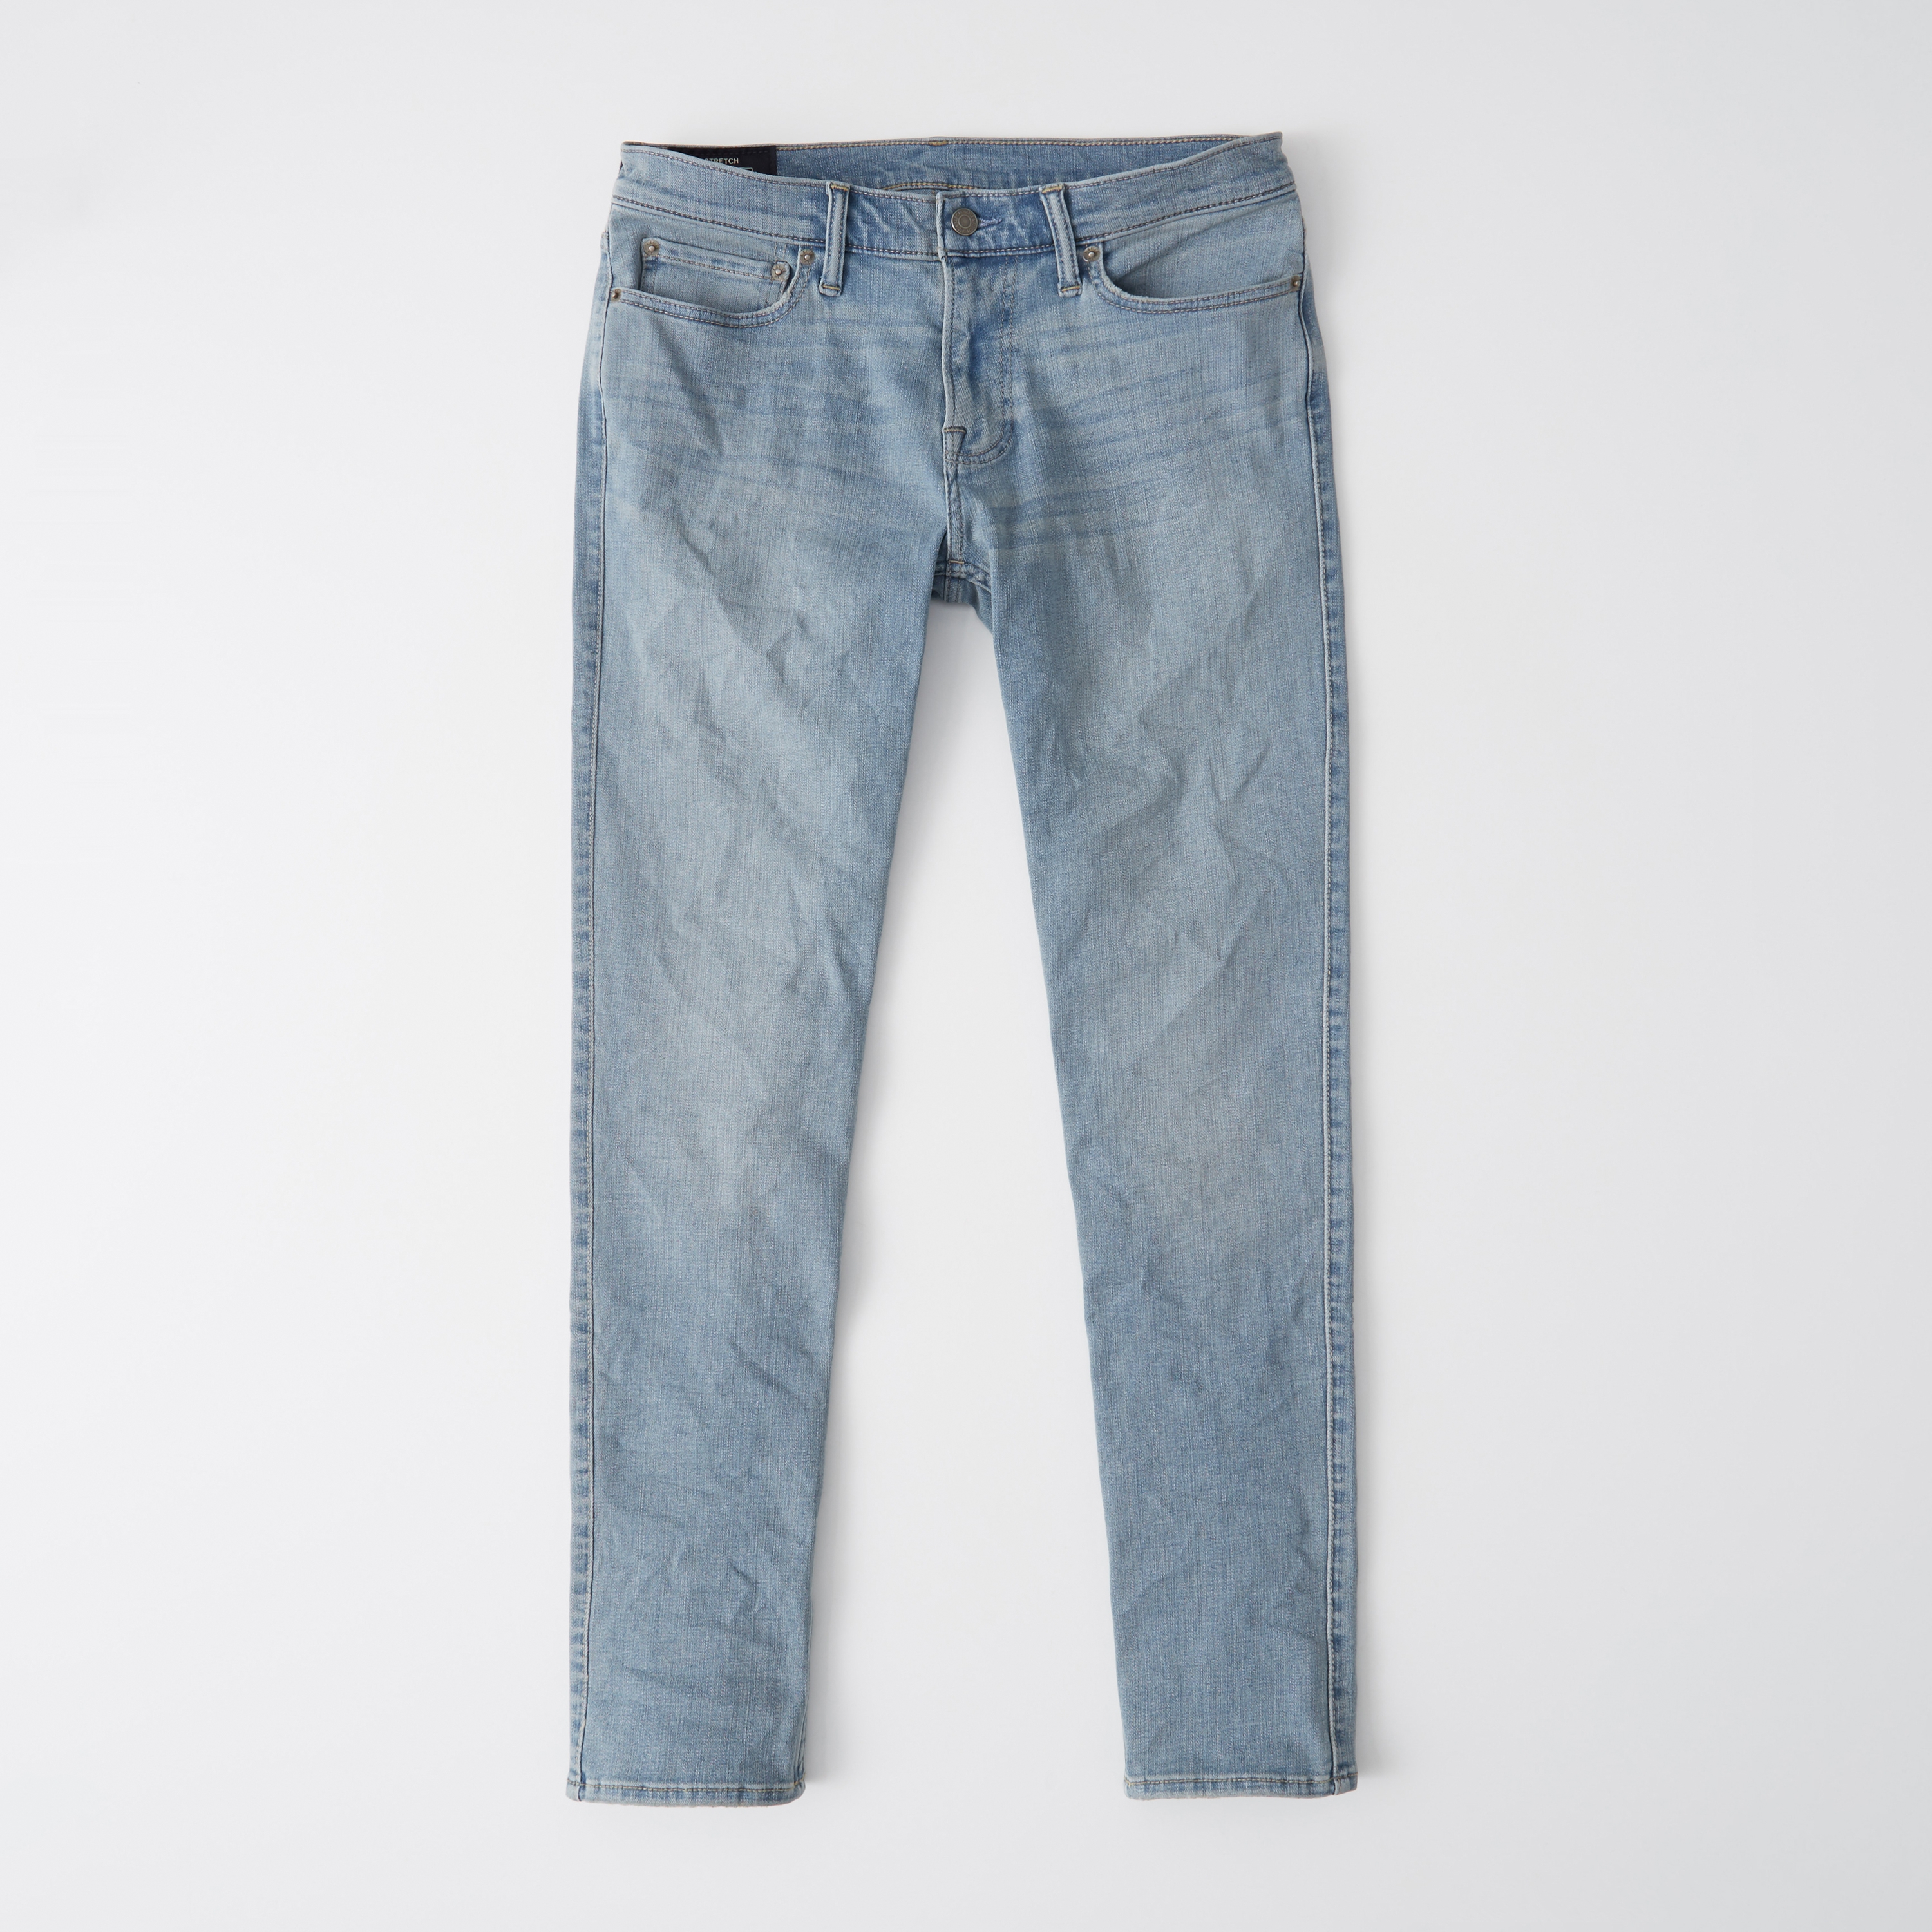 abercrombie and fitch athletic skinny